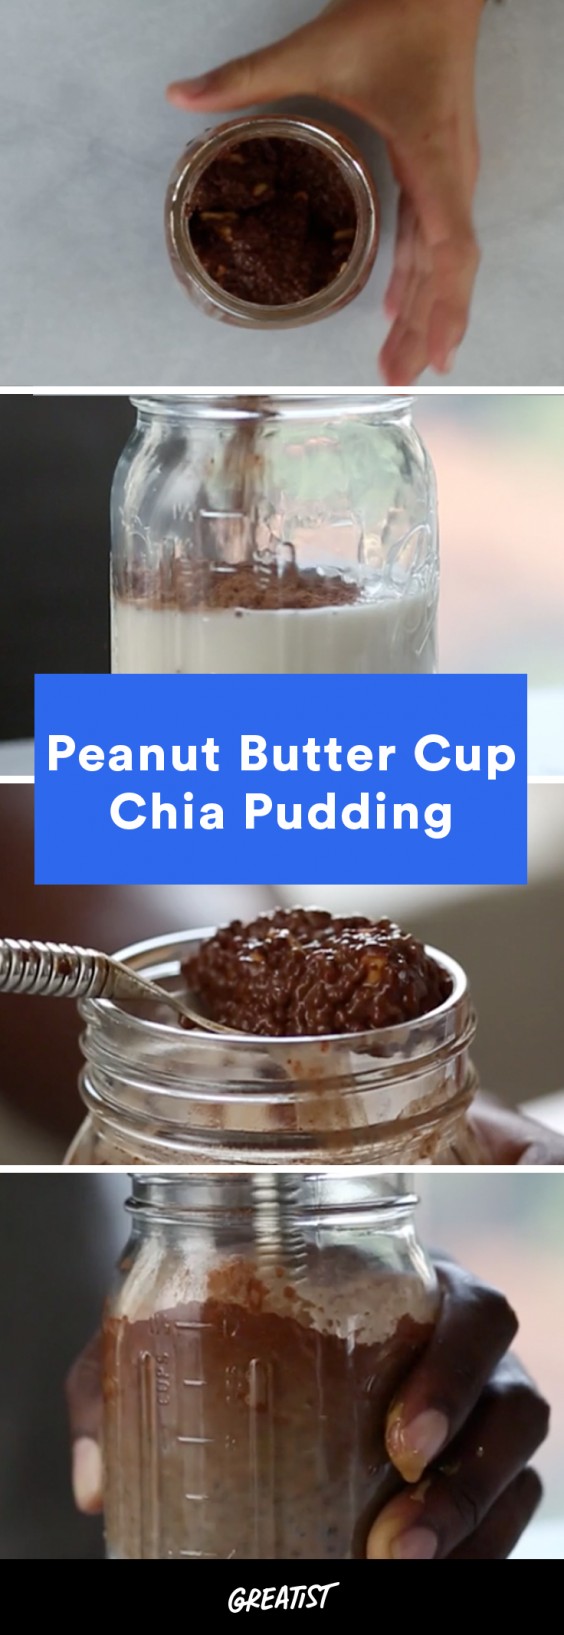 video: peanut butter chia pudding